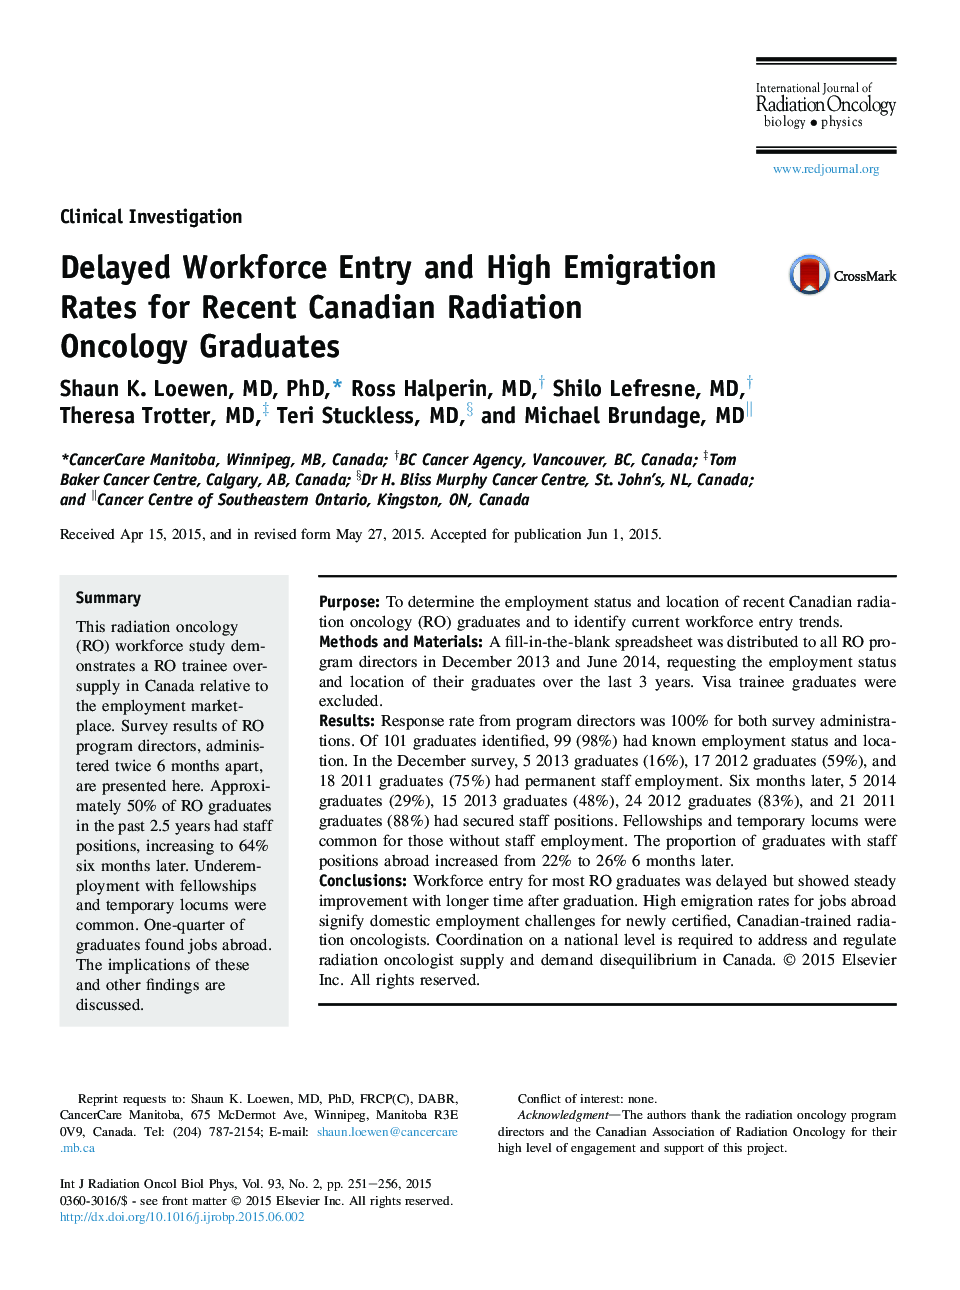 Delayed Workforce Entry and High Emigration Rates for Recent Canadian Radiation OncologyÂ Graduates